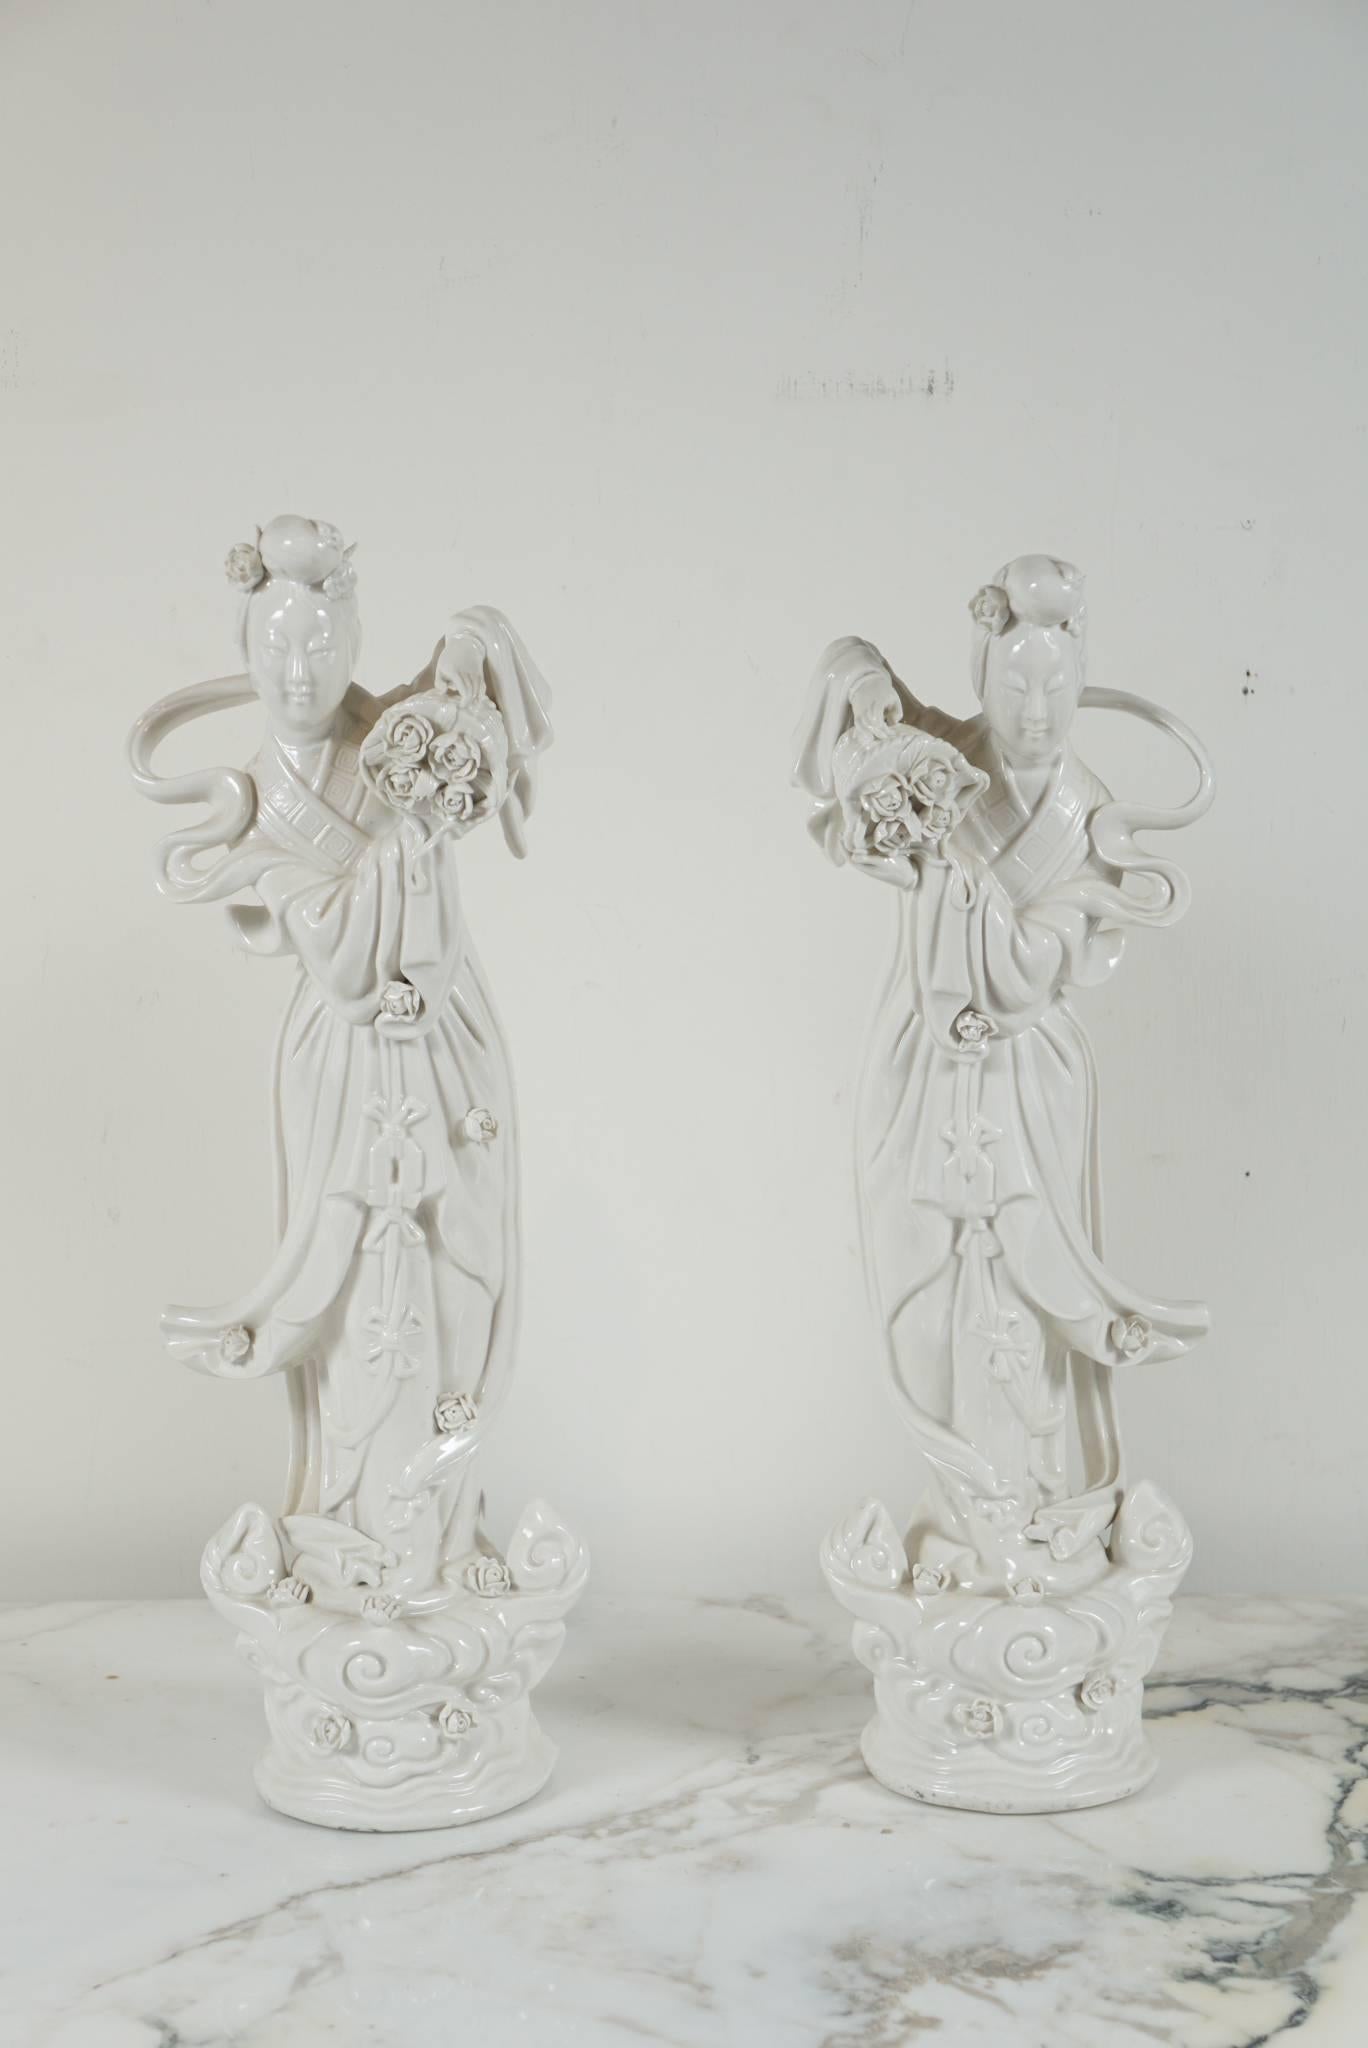 Here is a lovely pair of Blanc de Chine figurines with flowing lines and intricately carved flower details.